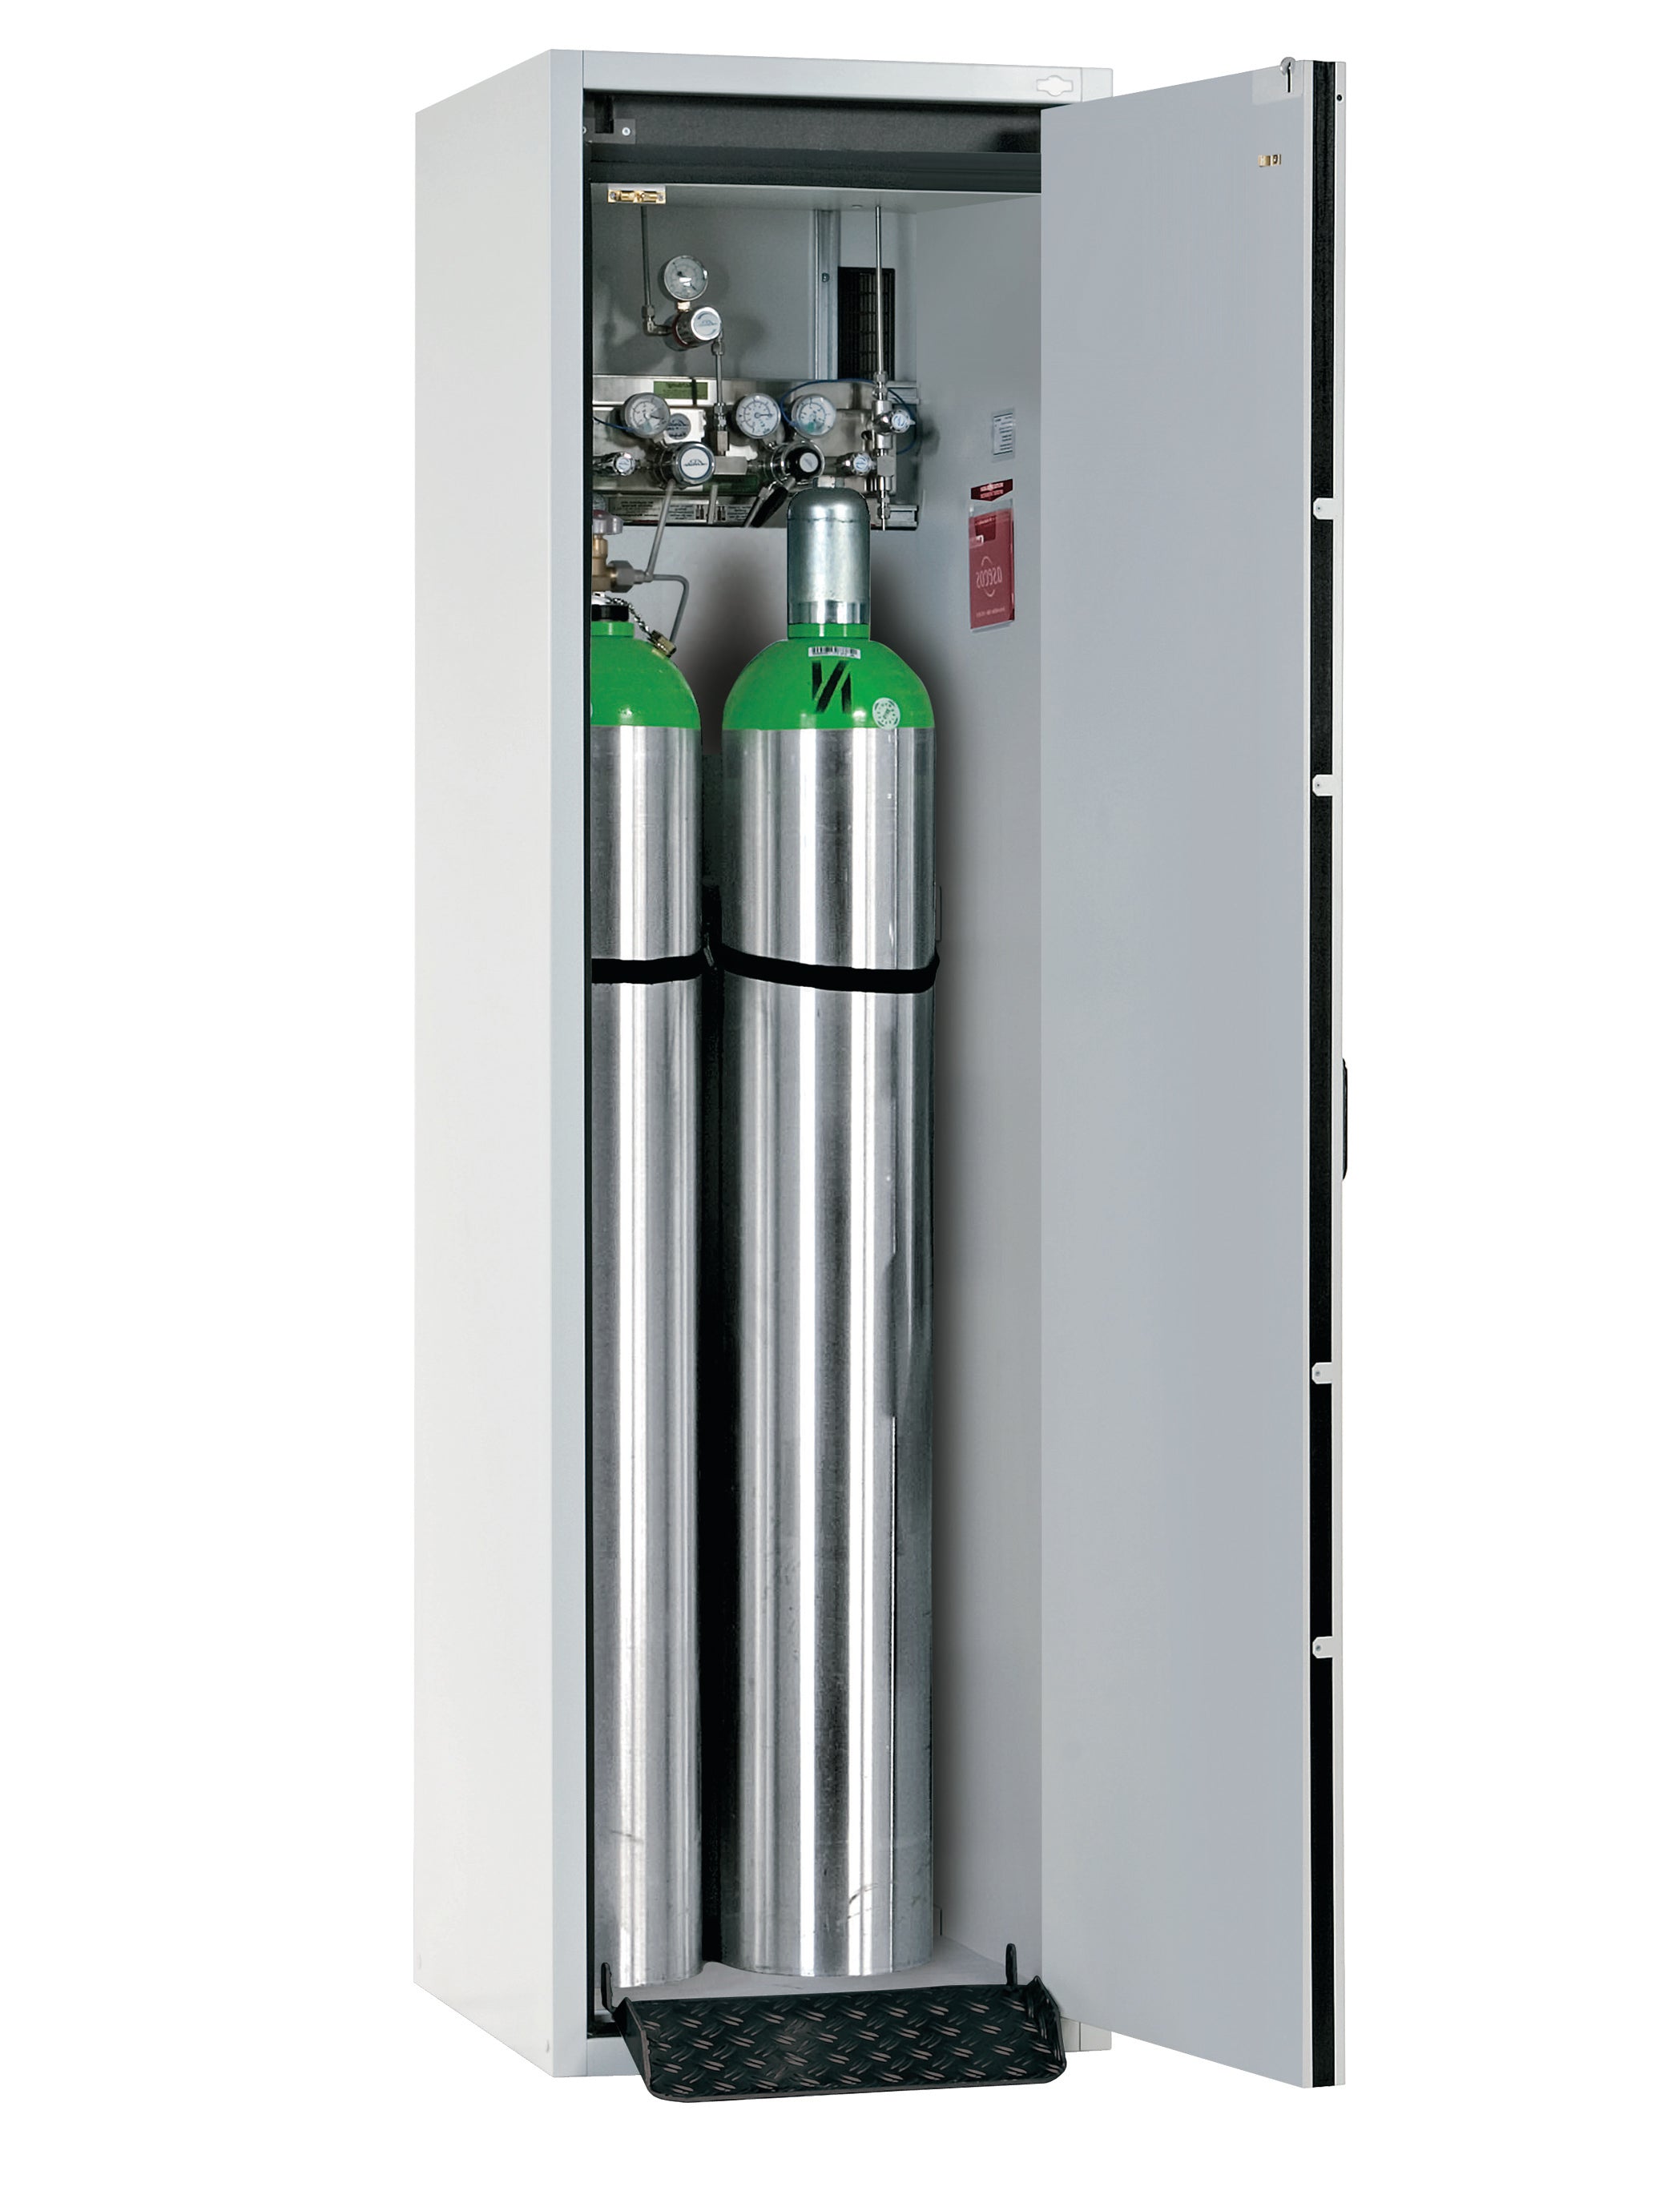 Type 30 compressed gas bottle cabinet G-CLASSIC-30 model G30.205.060.R in light gray RAL 7035 with standard interior fittings for 2x compressed gas bottles of 50 liters each